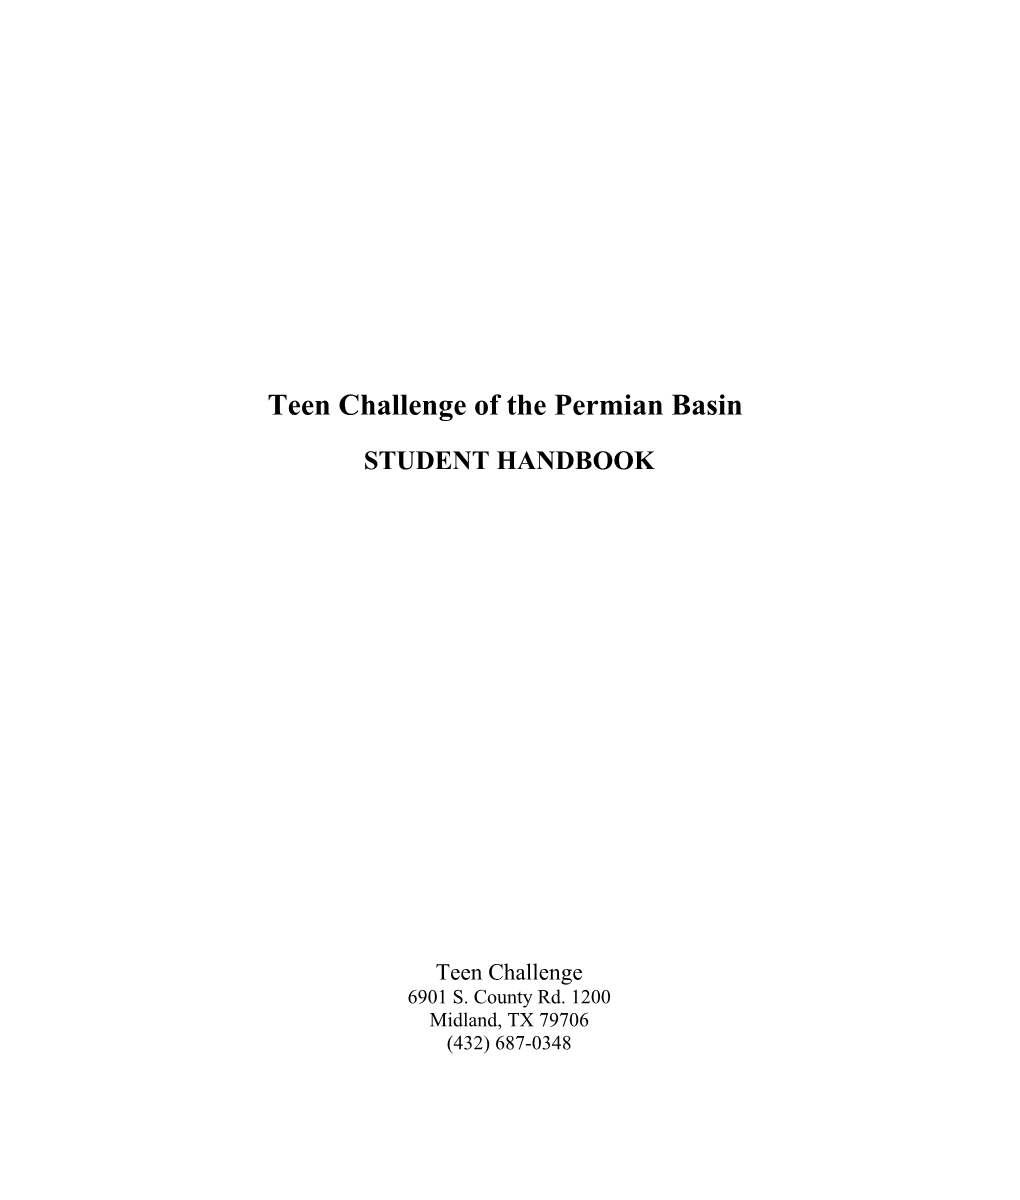 Teen Challenge of the Permian Basin